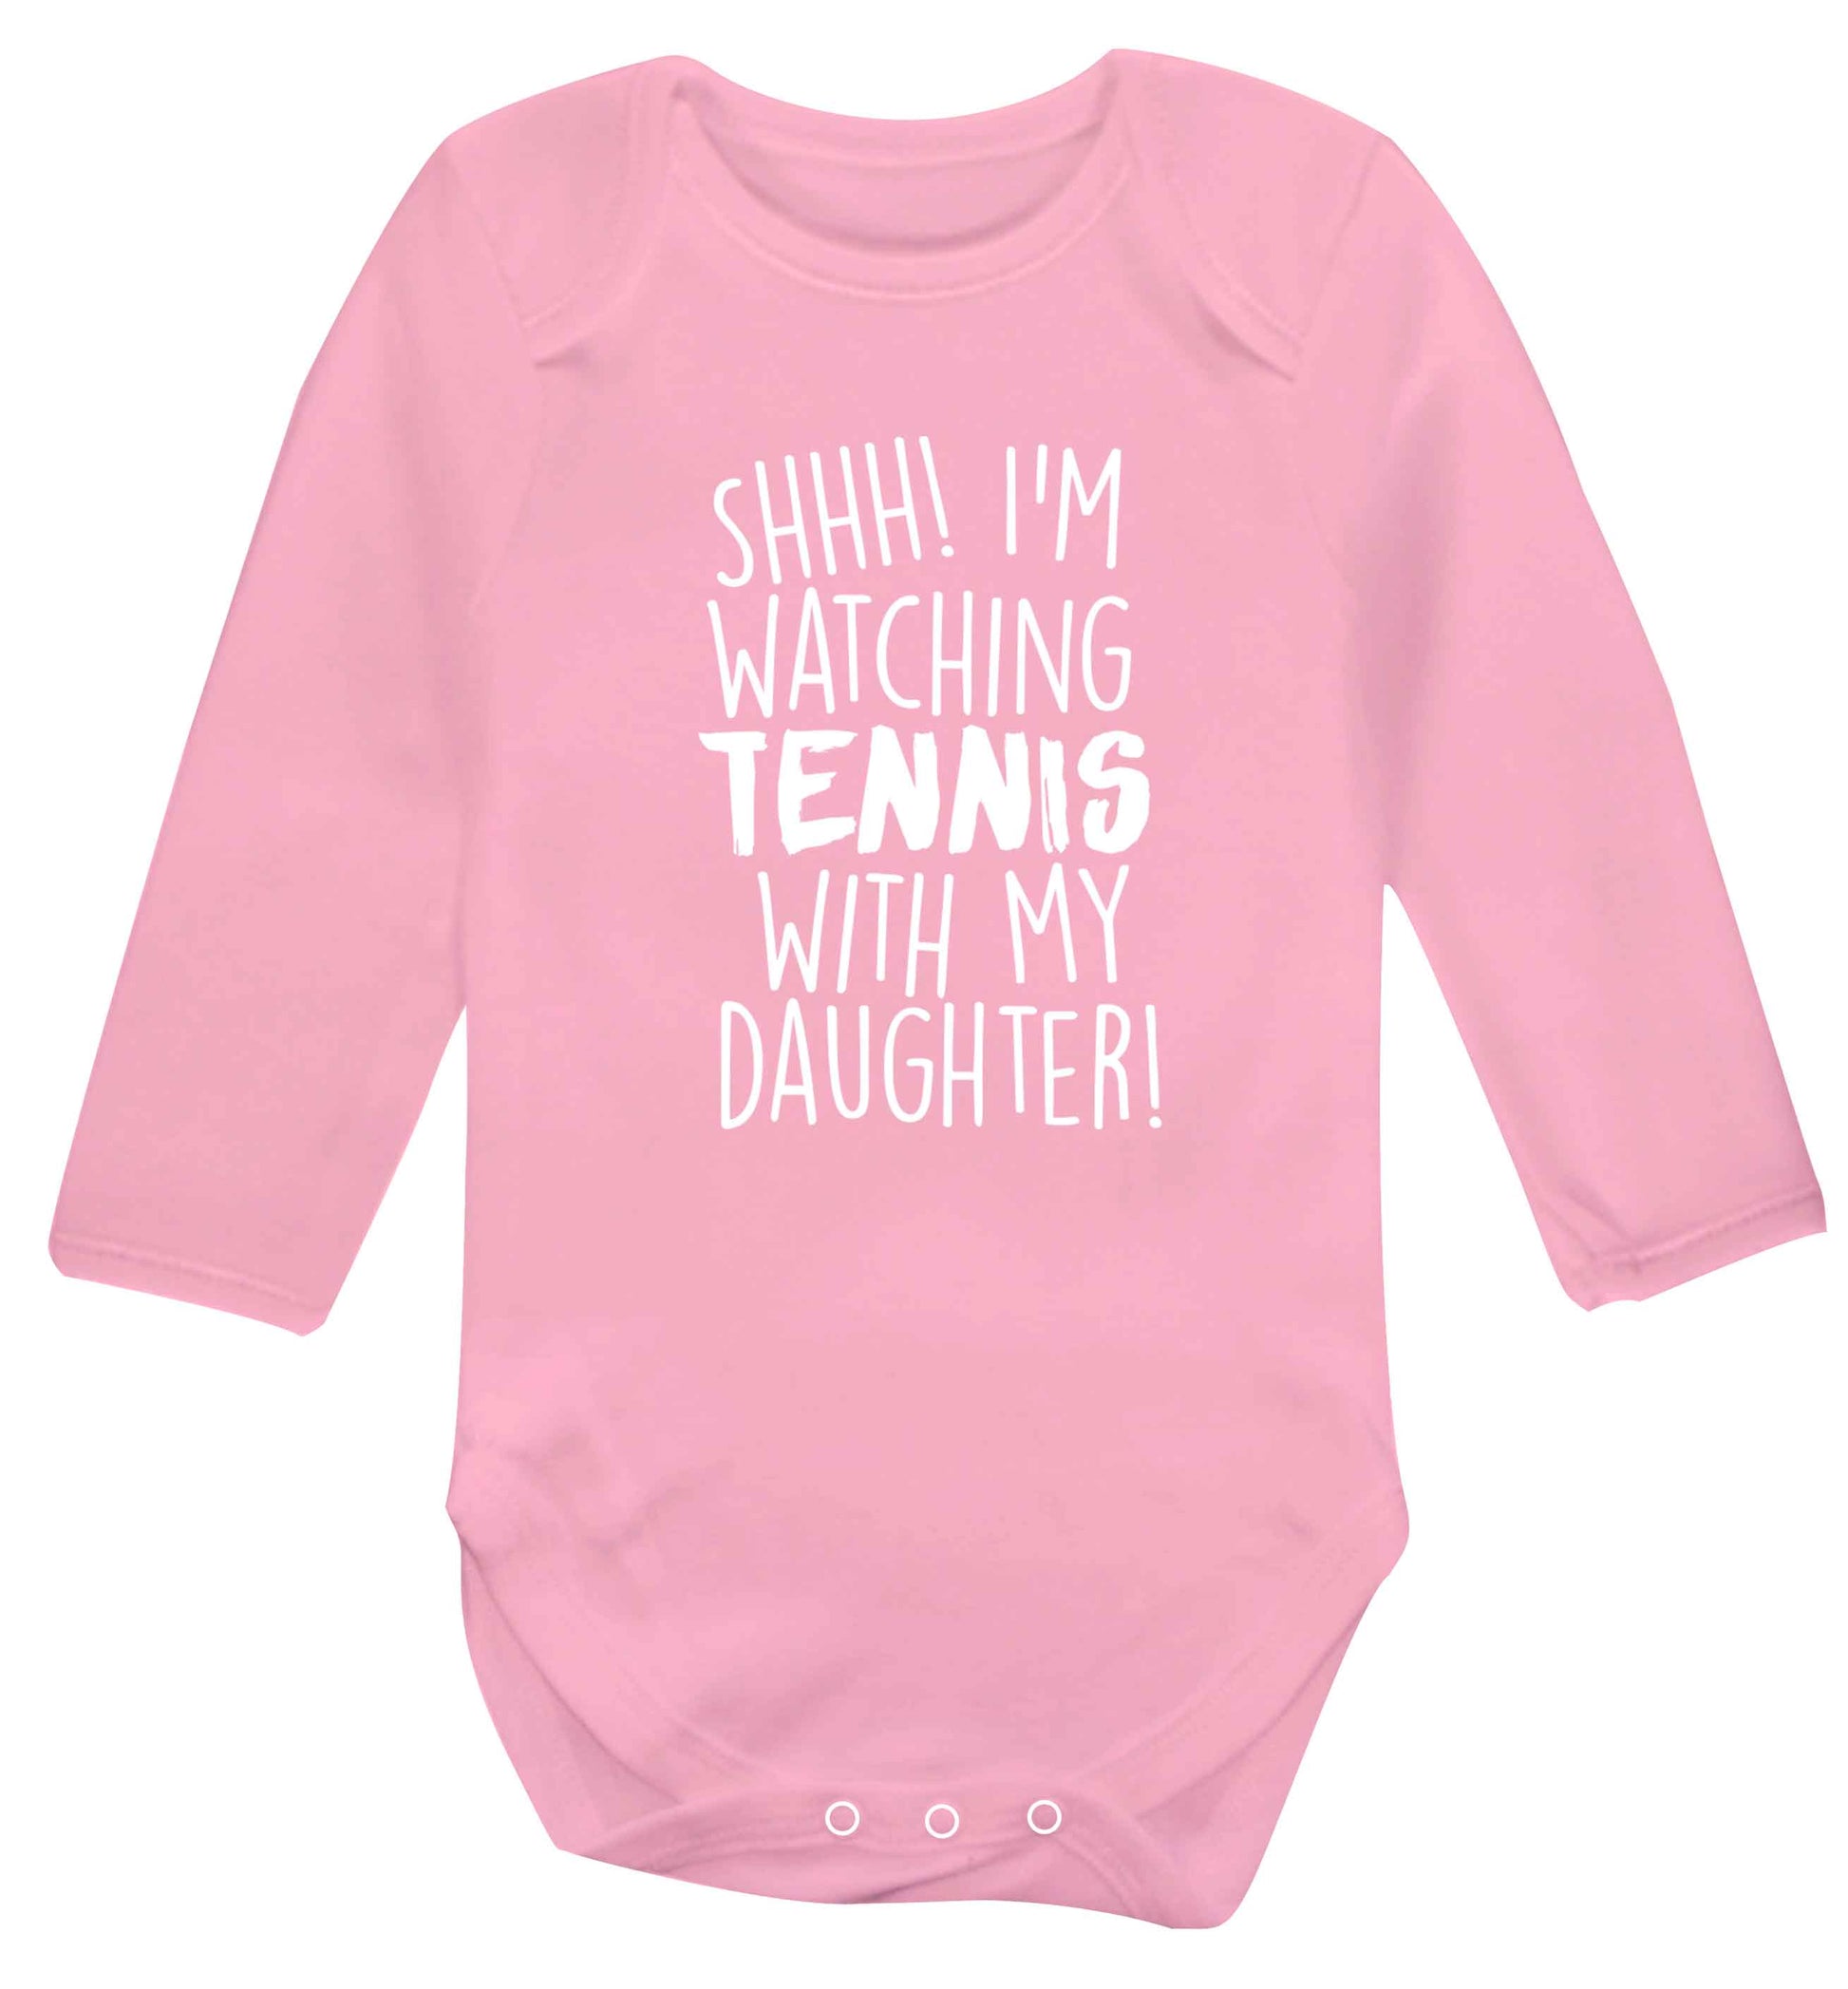 Shh! I'm watching tennis with my daughter! Baby Vest long sleeved pale pink 6-12 months